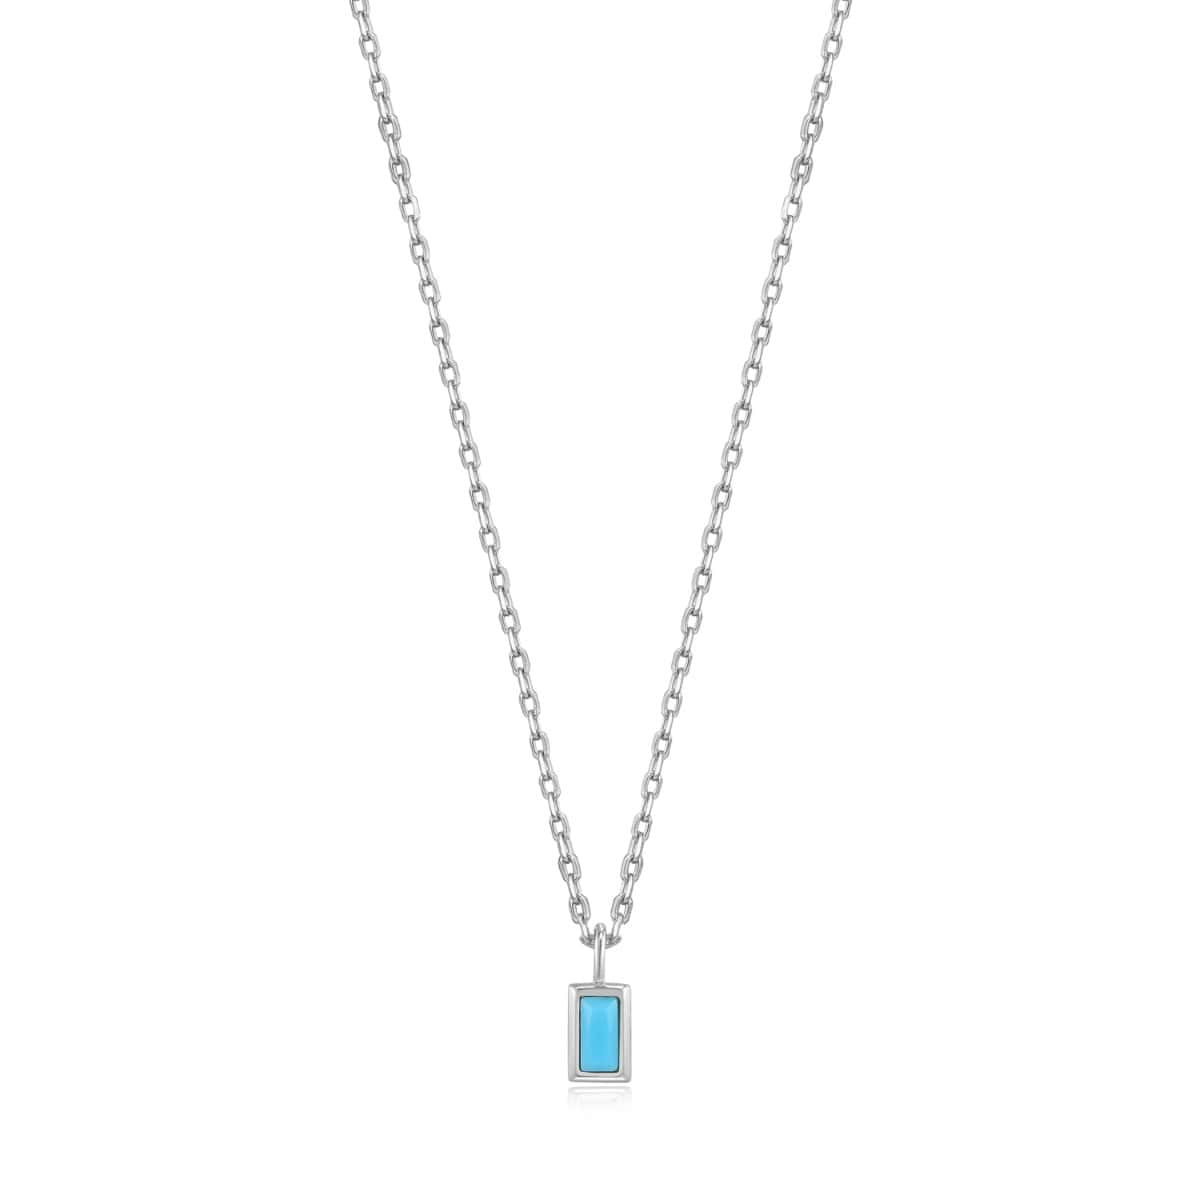 Ania Haie Turquoise Drop Pendant Necklace - Silver - N033-01H